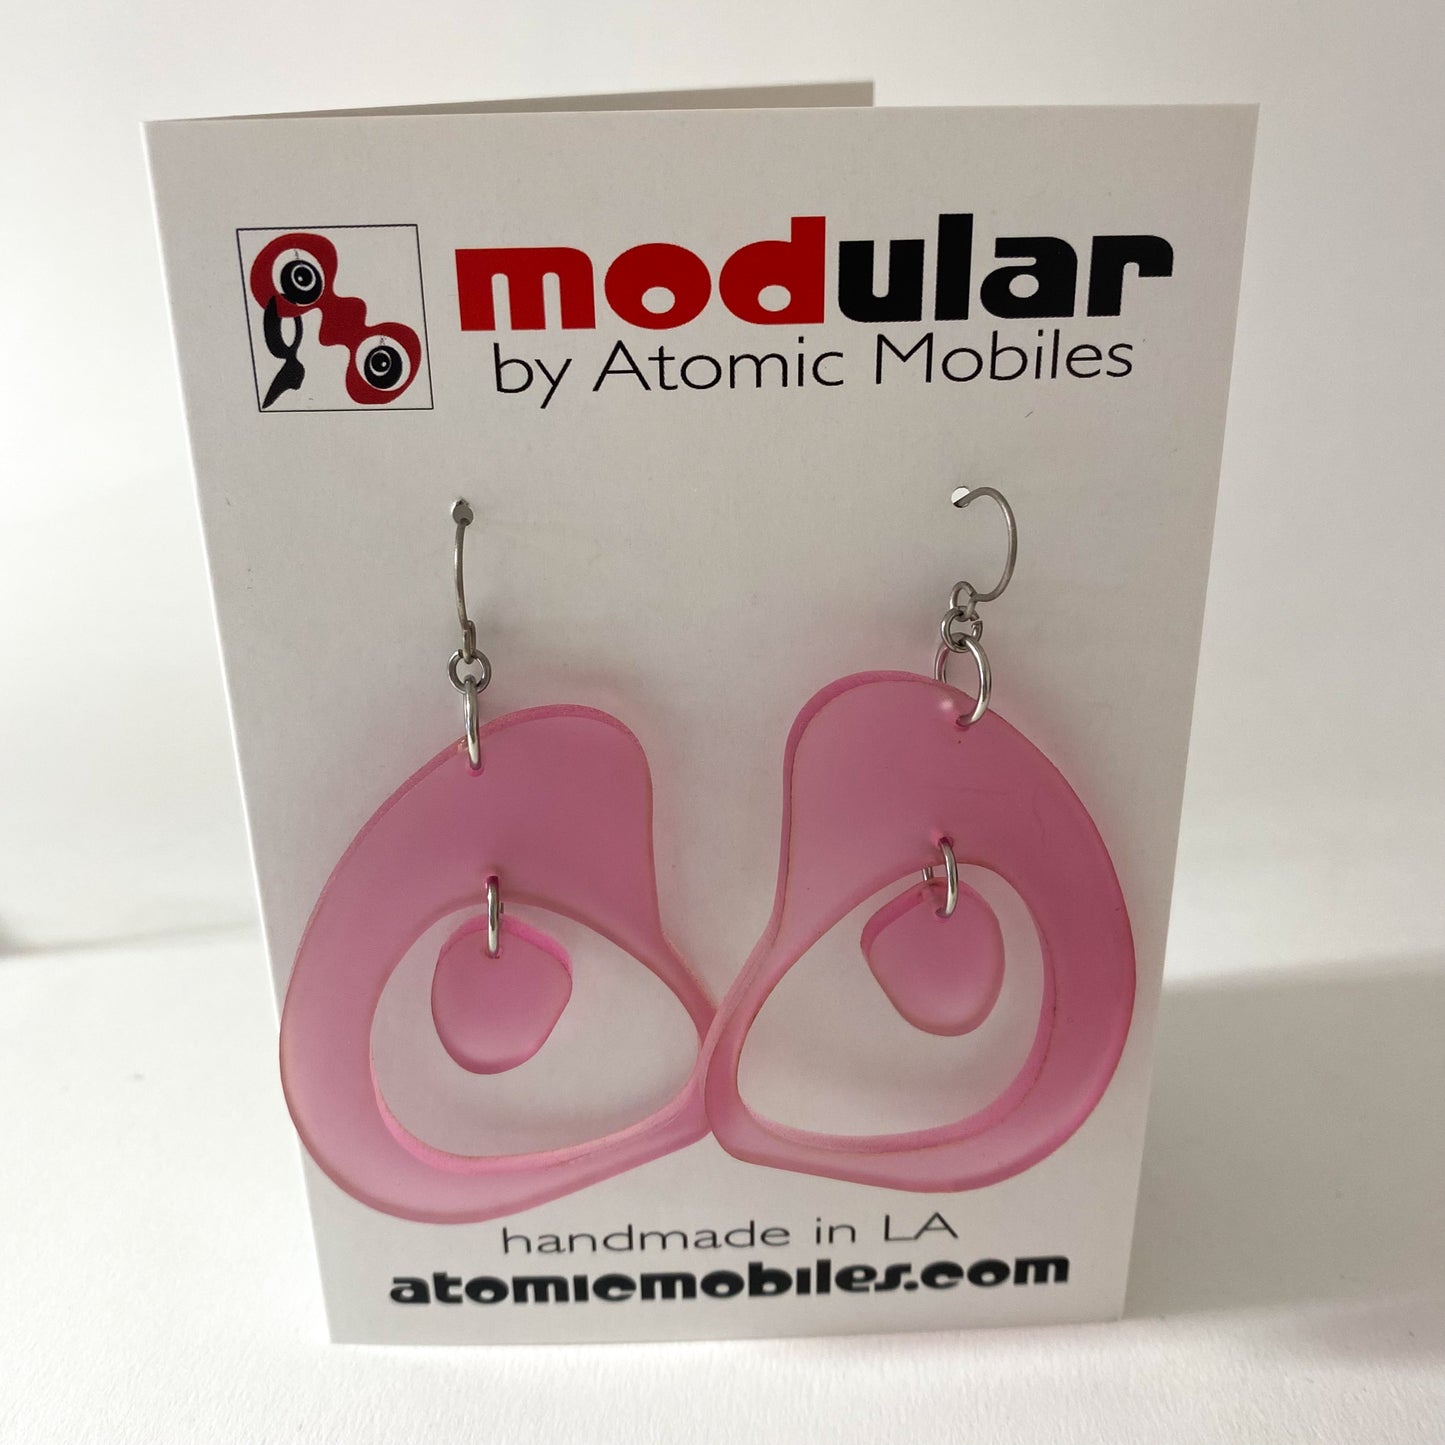 Frosted Pink Boomerang retro mid century modern statement fashion earrings by AtomicMobiles.com